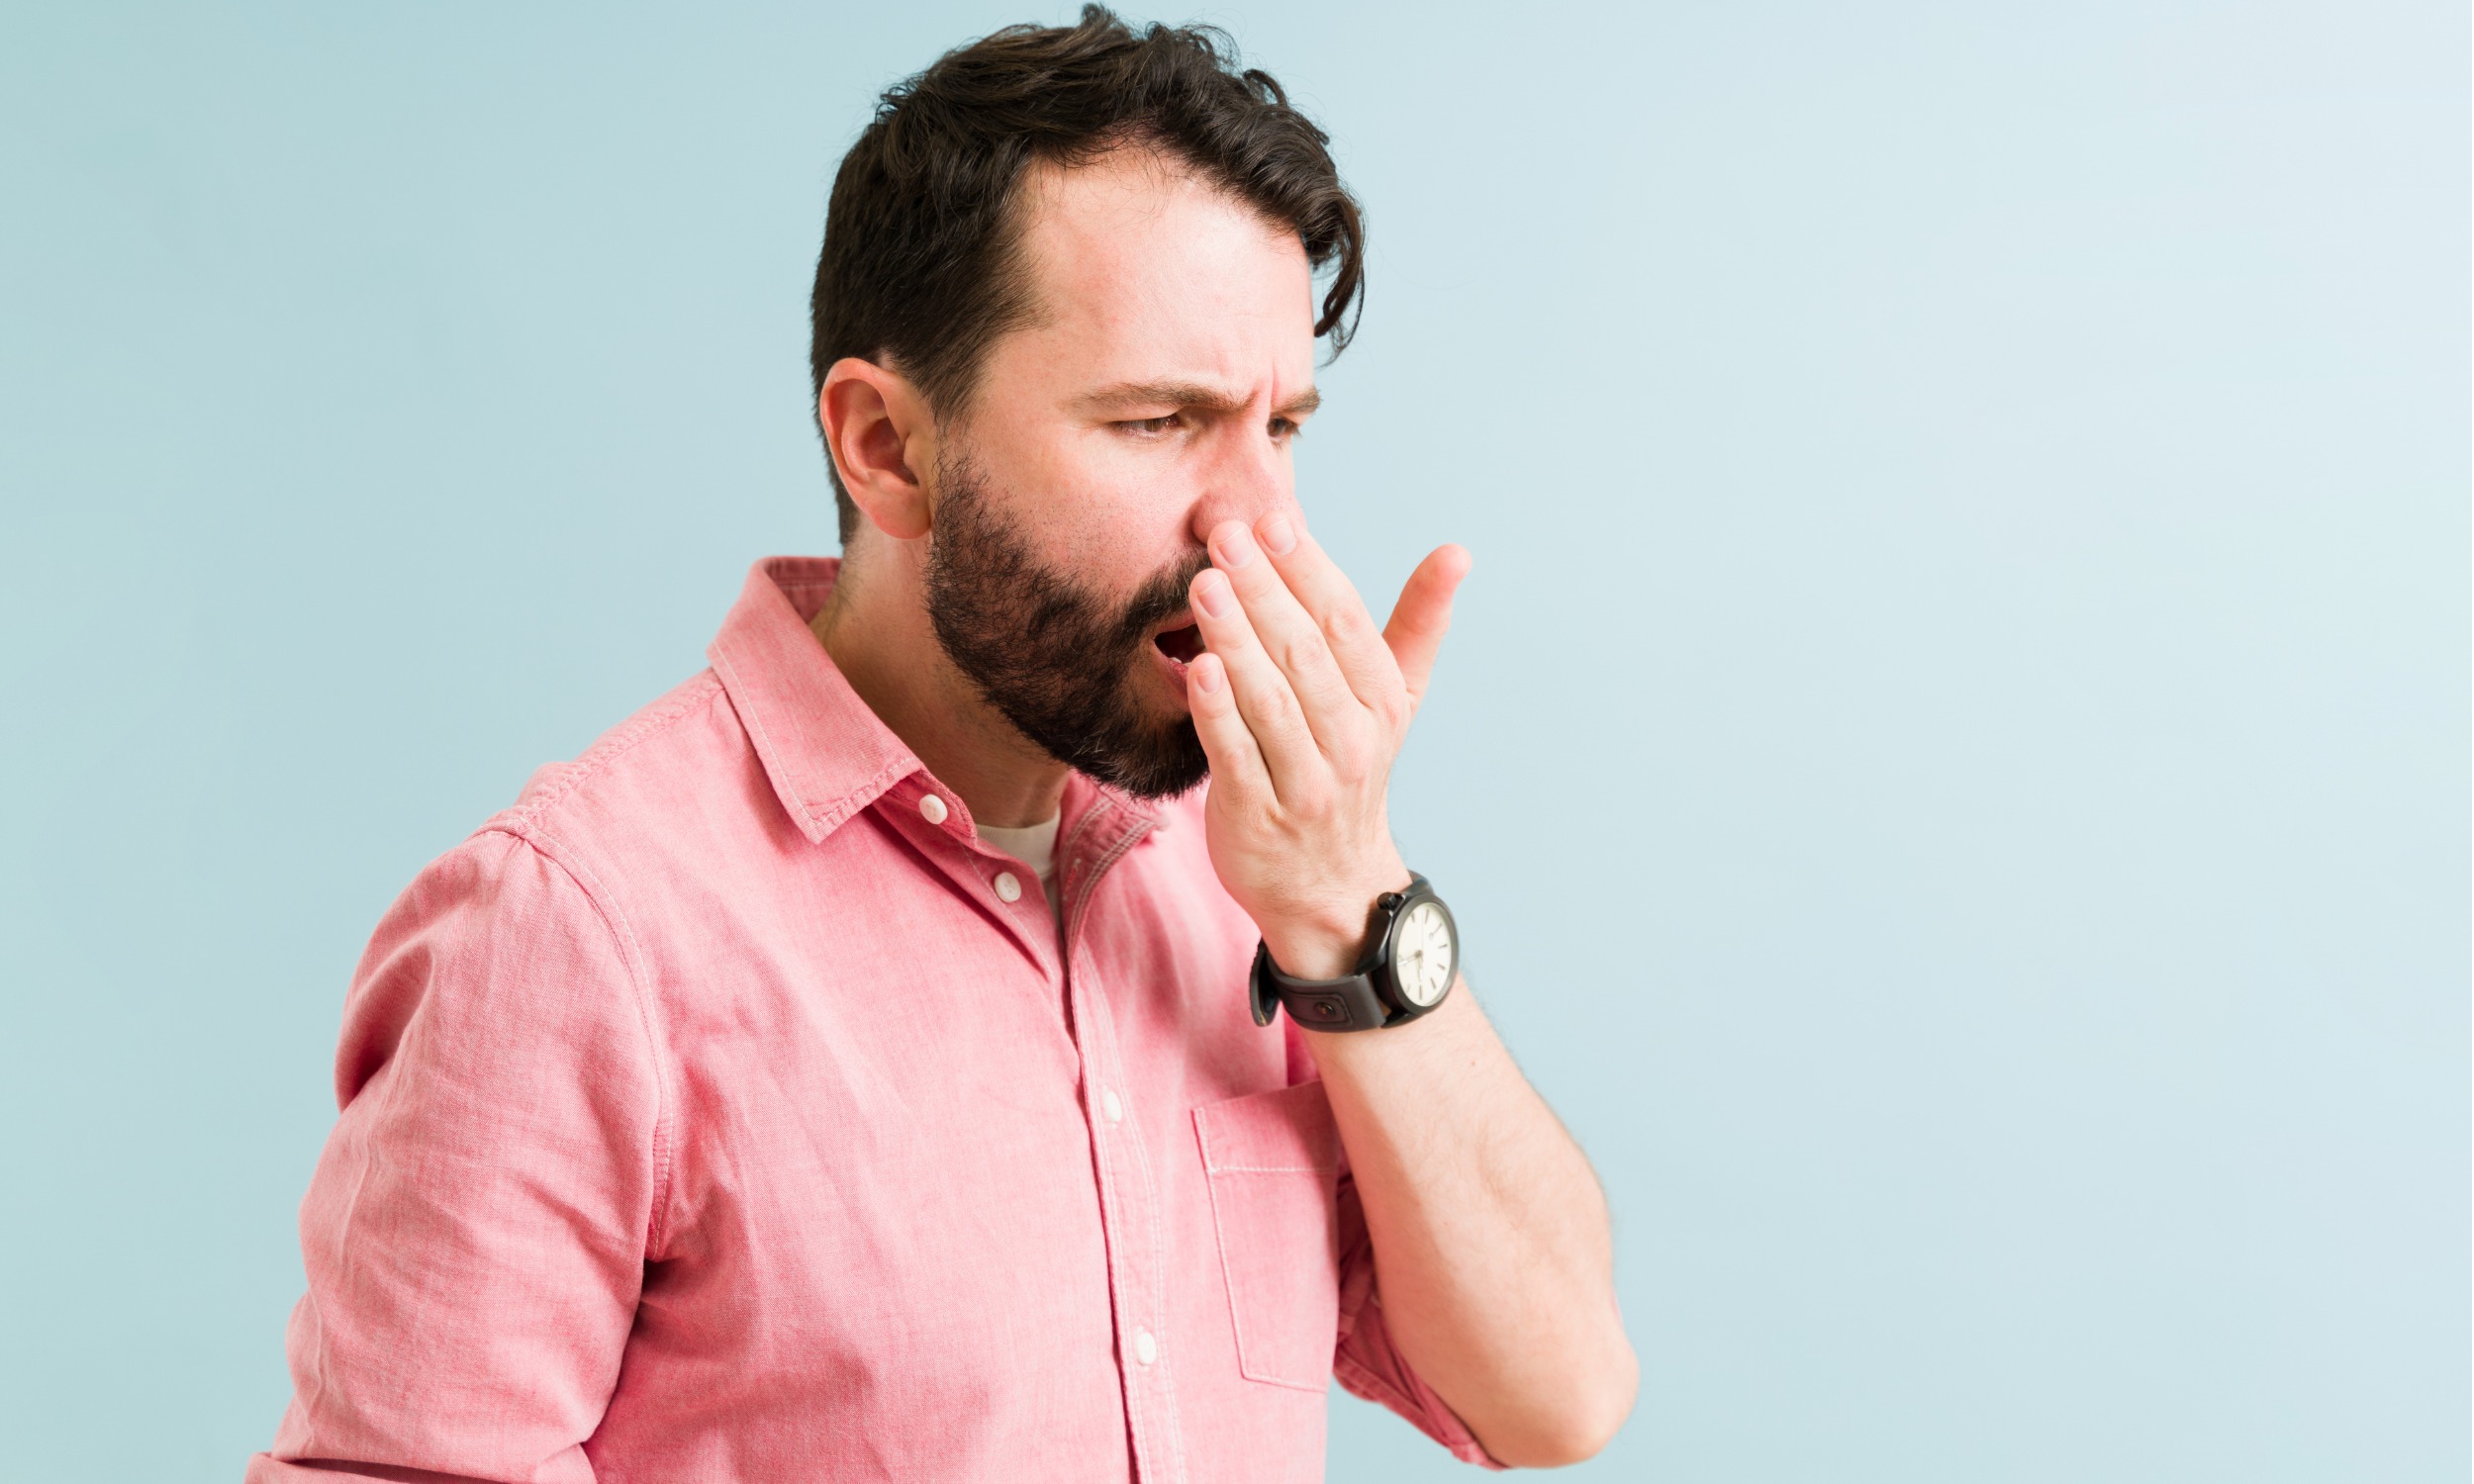 How To Get Rid Of Bad Breath